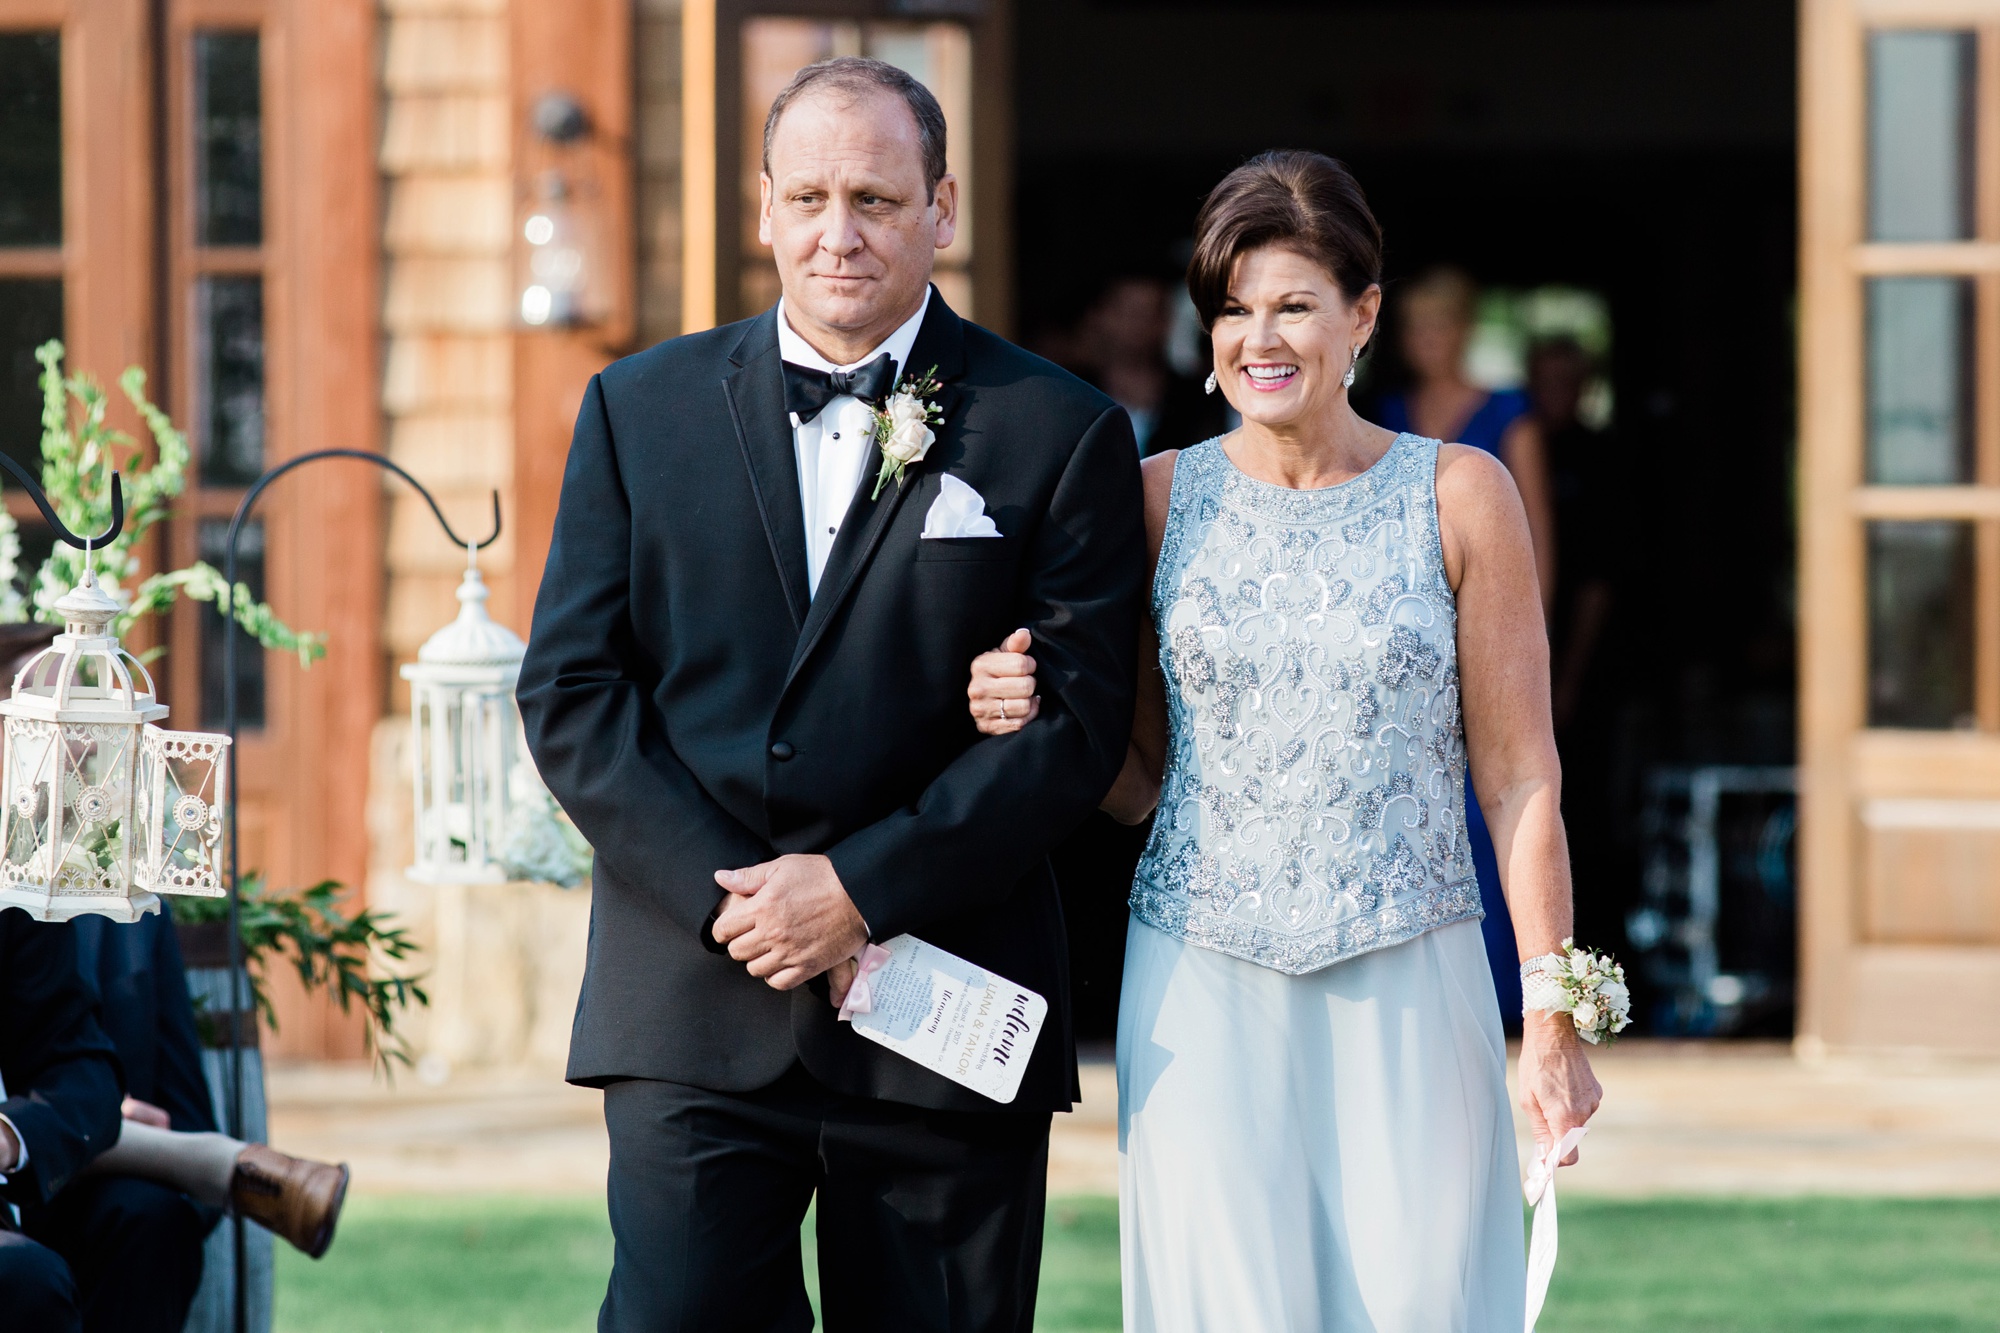 Parents of the groom walk down the aisle in these wedding pictures from Foxhall Sporting Club by Rebecca Cerasani, Luxury wedding photographer